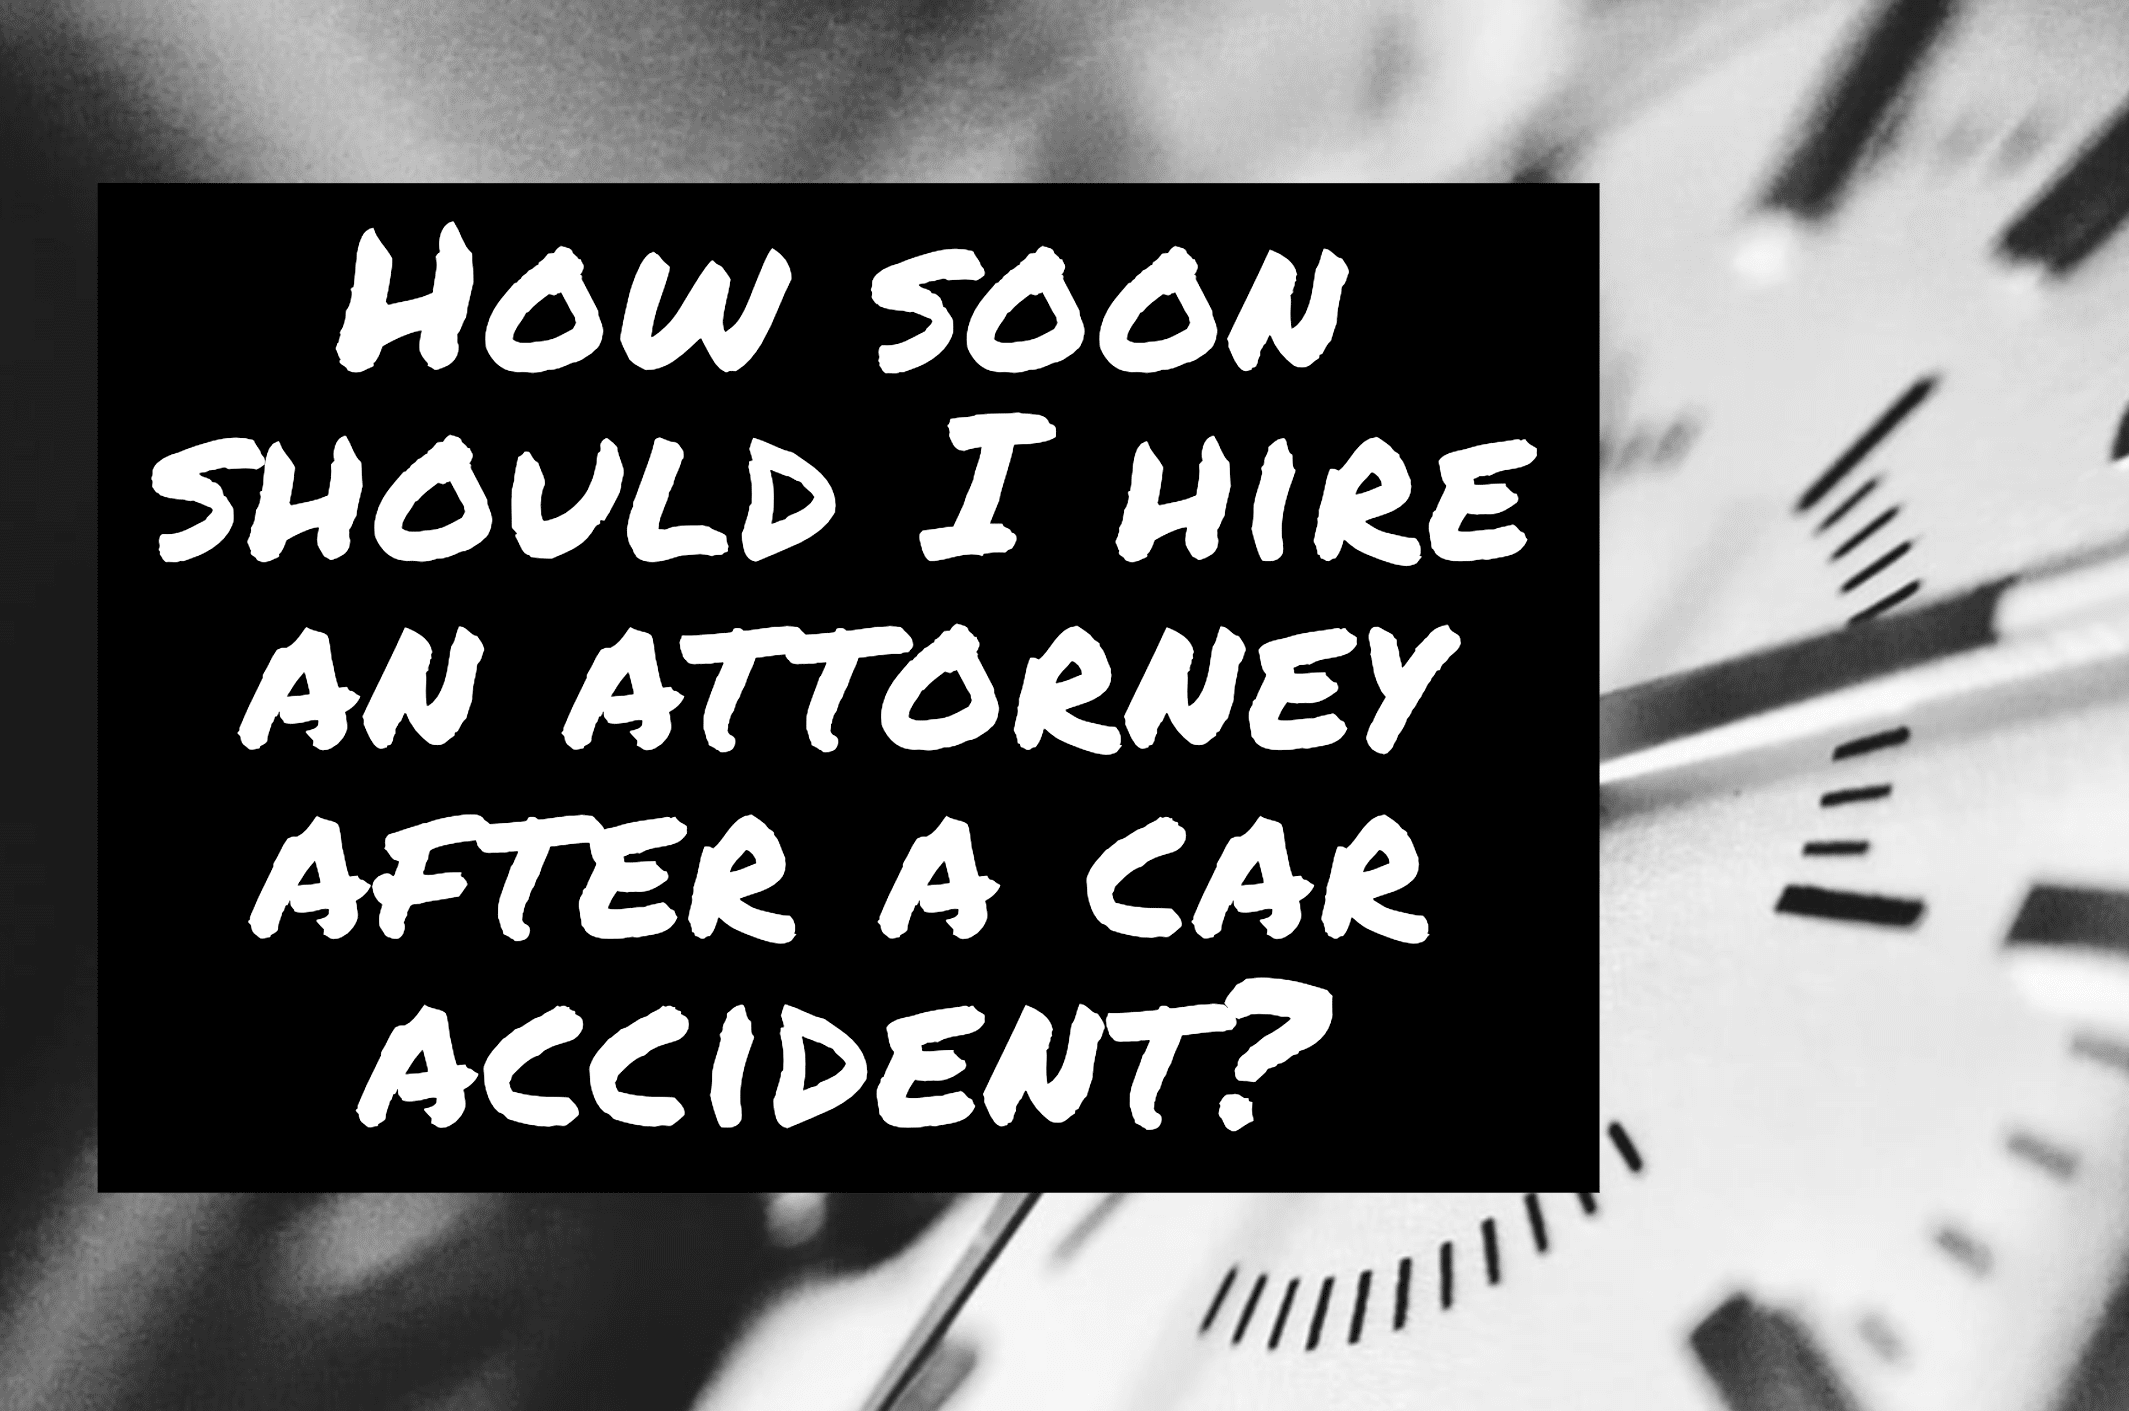 how soon should i hire lawyer after car accident